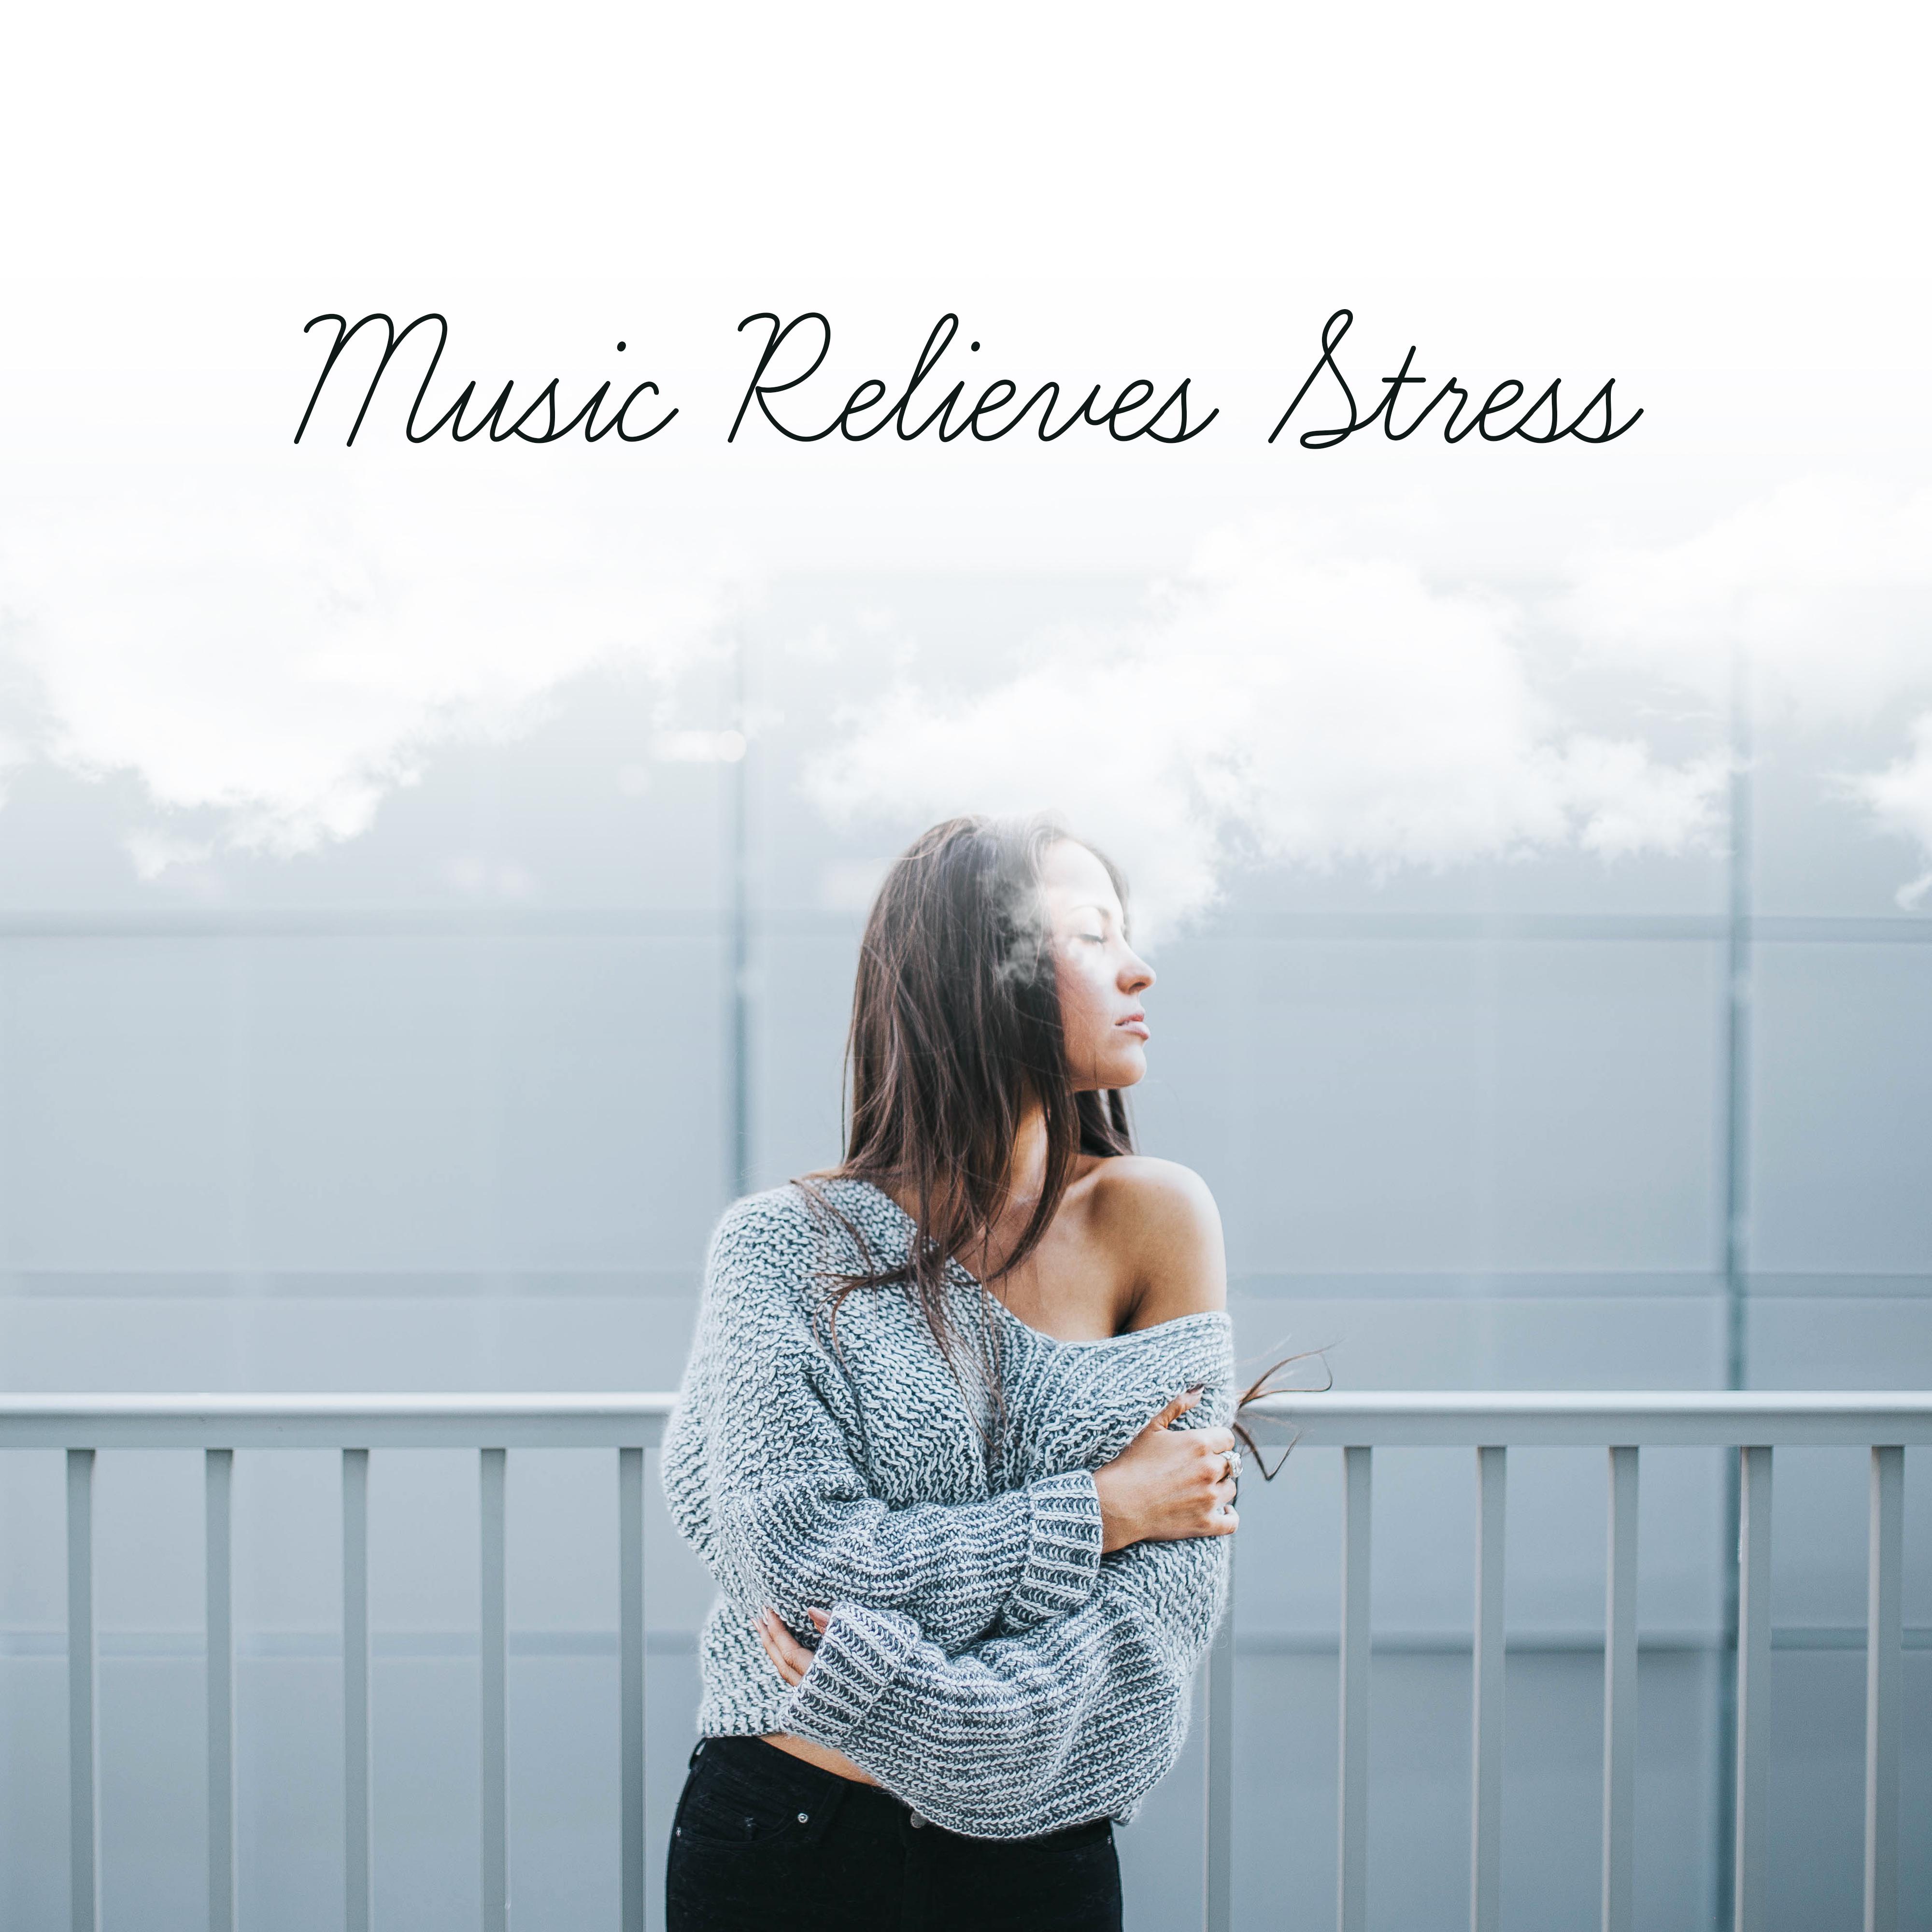 Music Relieves Stress  Pure Relaxation, Peaceful Mind, Zen Music to Rest, Inner Tranquil, Healing Sounds, Anti Stress Music, New Age